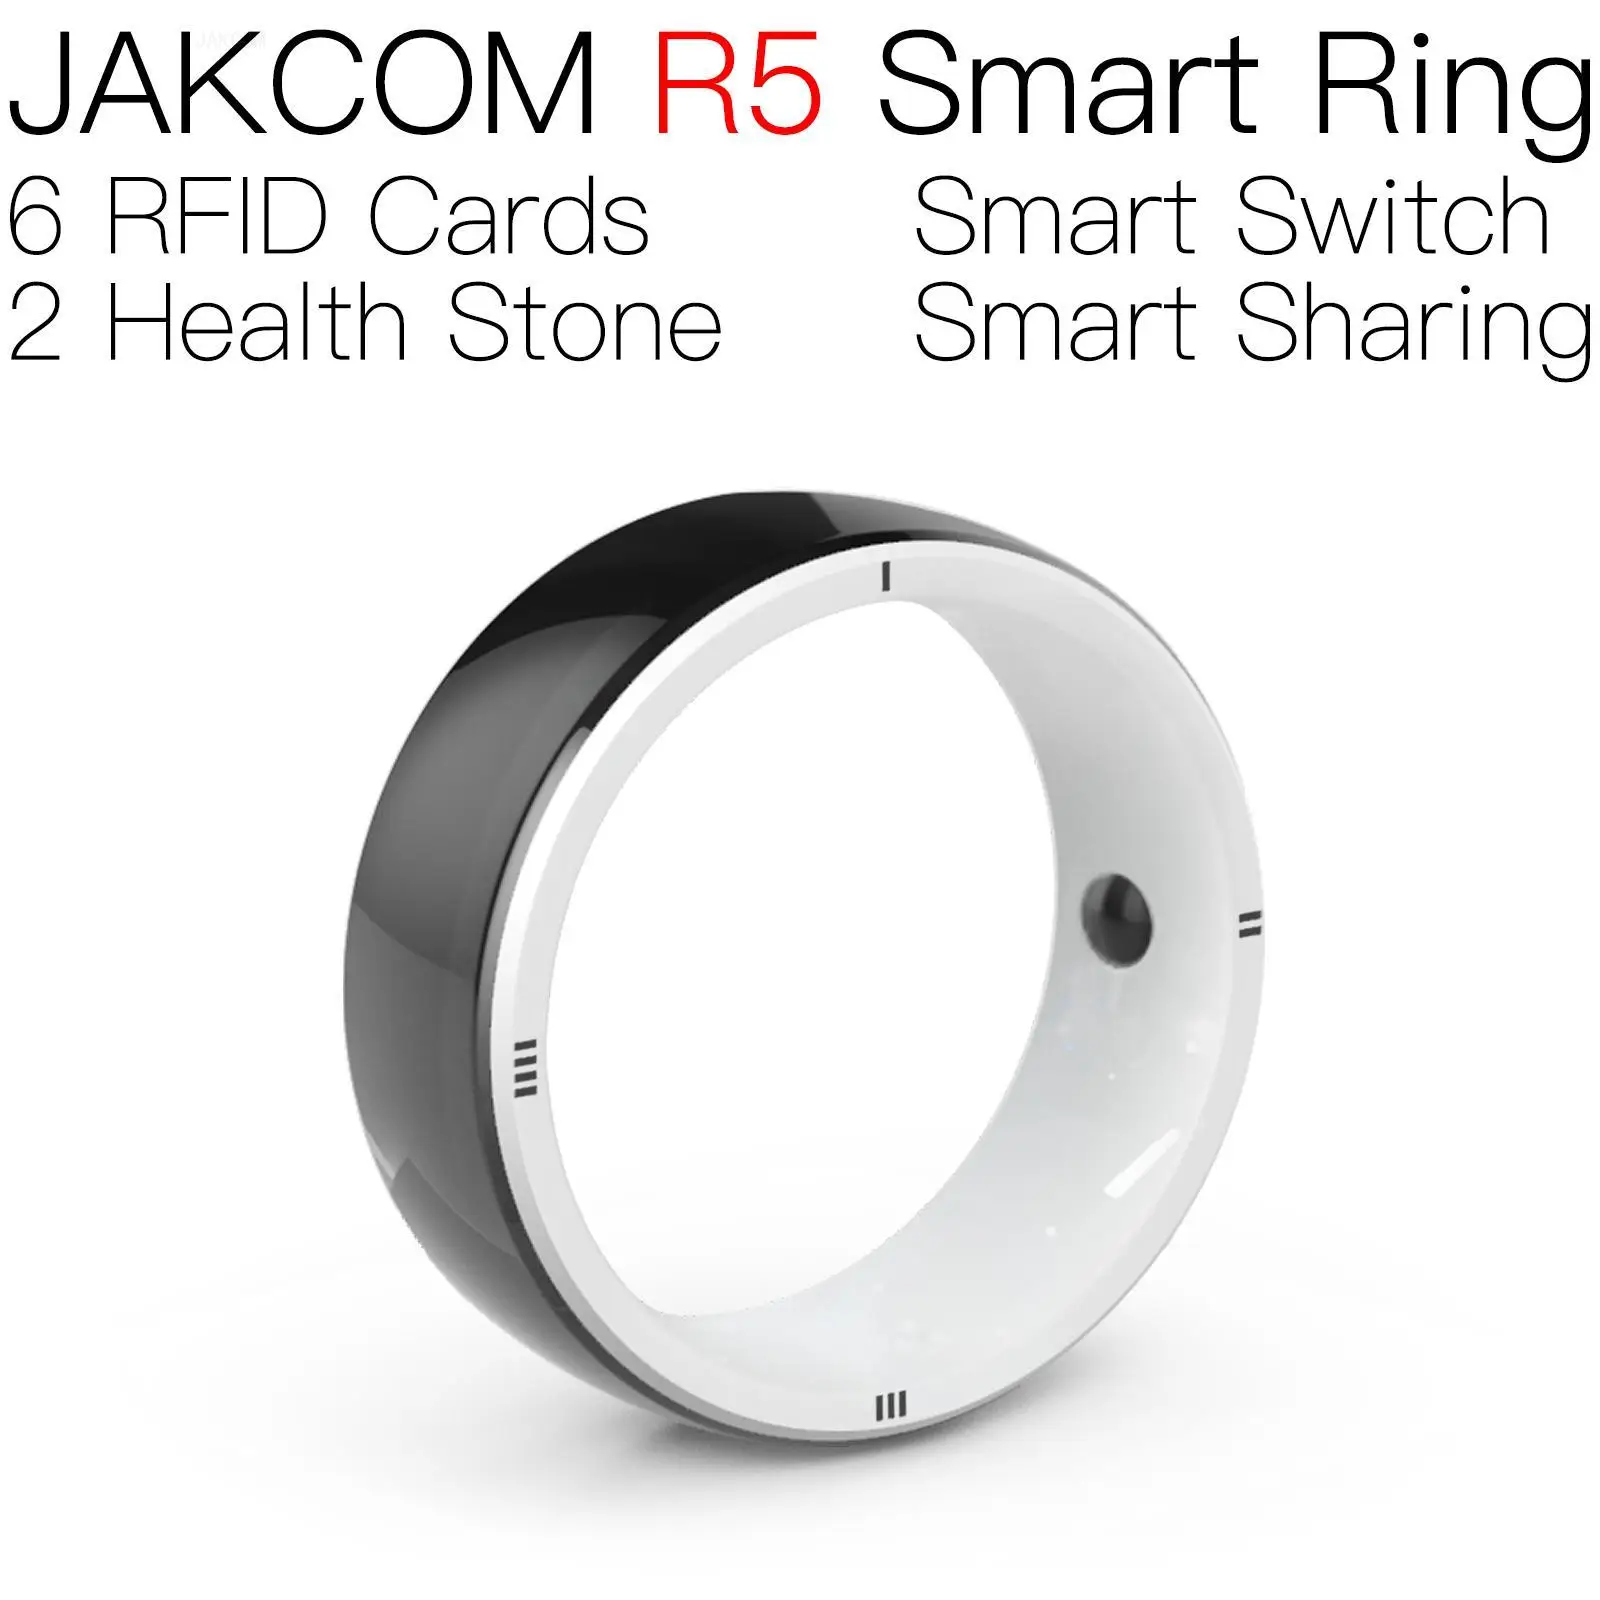 

JAKCOM R5 Smart Ring Nice than rfid blue android 5g nfc em4100 tk4100 games acr 122u access control 125 white cards caterpillar